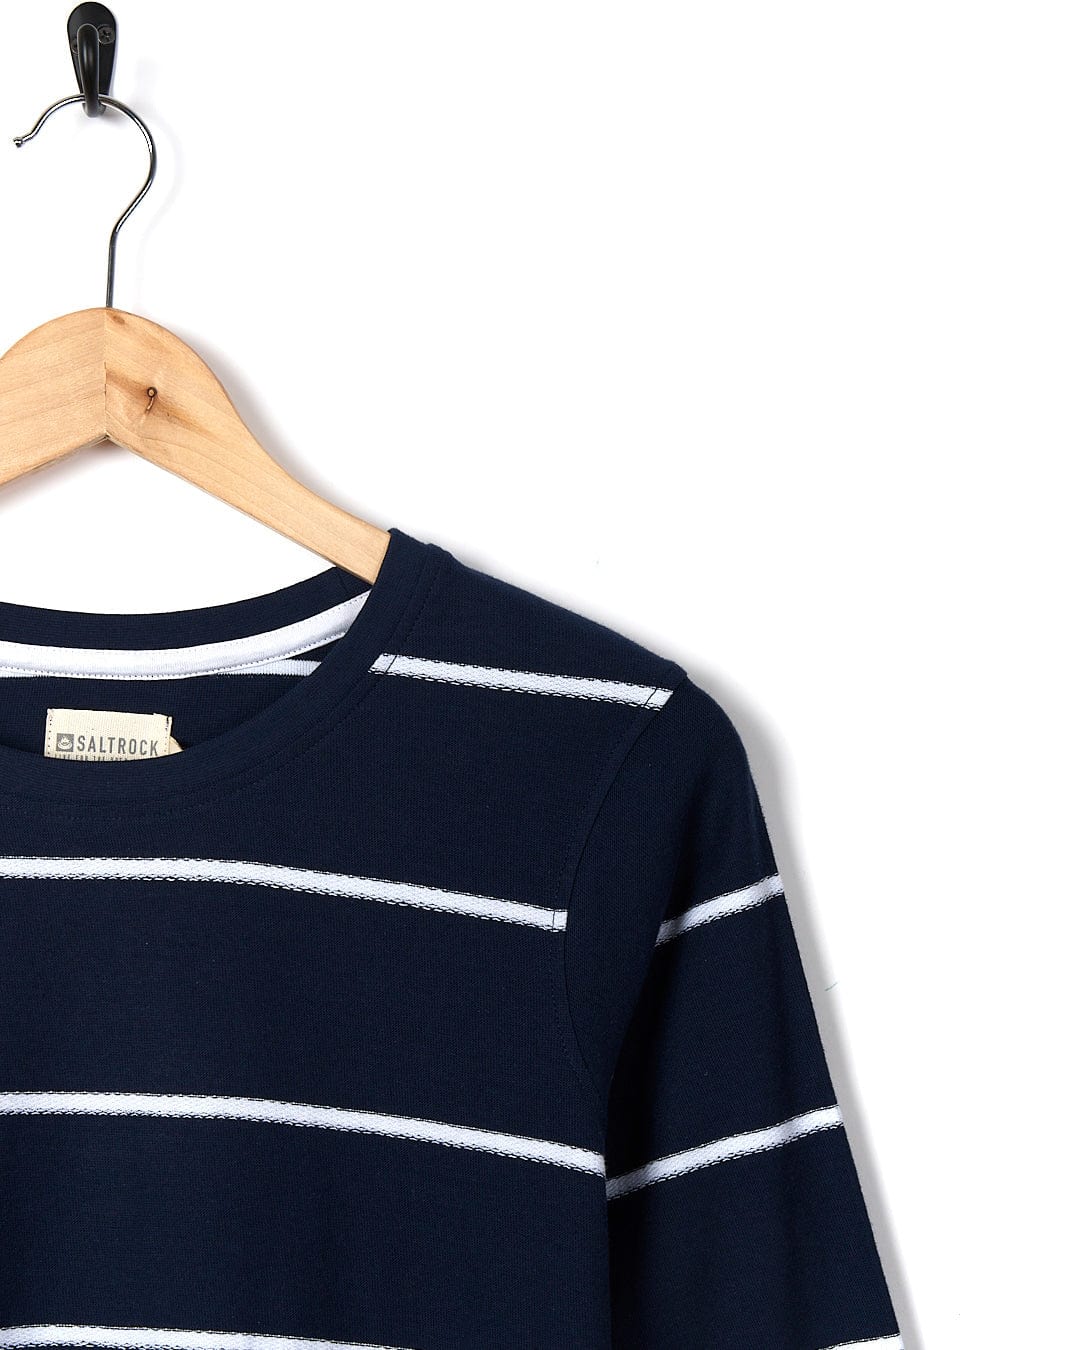 Hartland - Women's Striped Long Sleeve T-Shirt - Blue with Saltrock branding hanging on a wooden hanger against a white background.